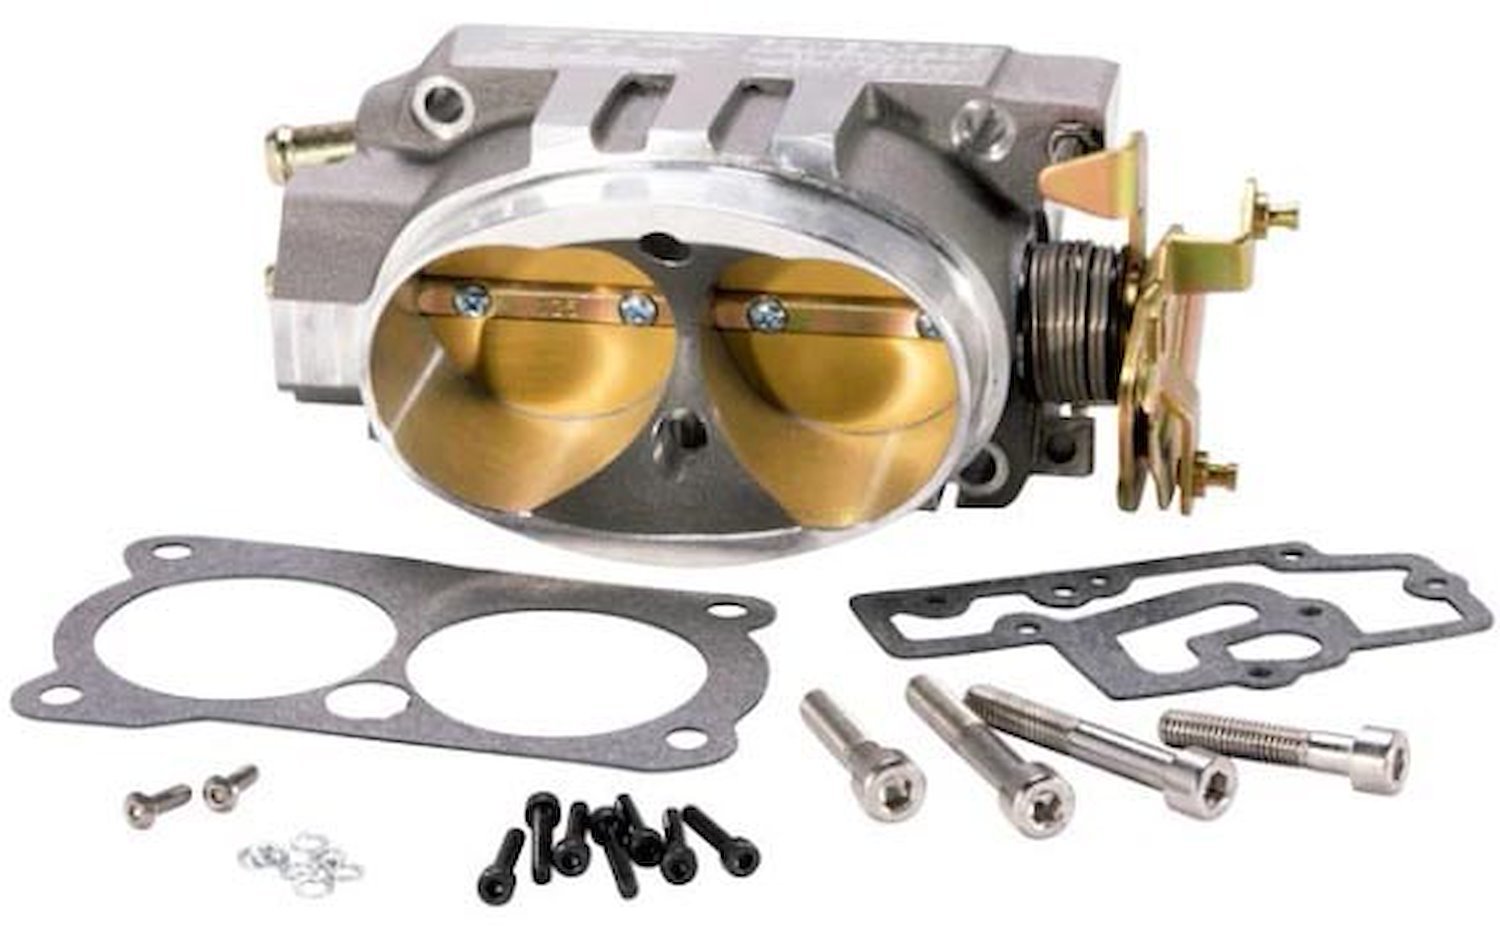 1544 Power Plus Twin 58 mm Throttle Body for 1994-1997 GM LT1 5.7L V8 Engines